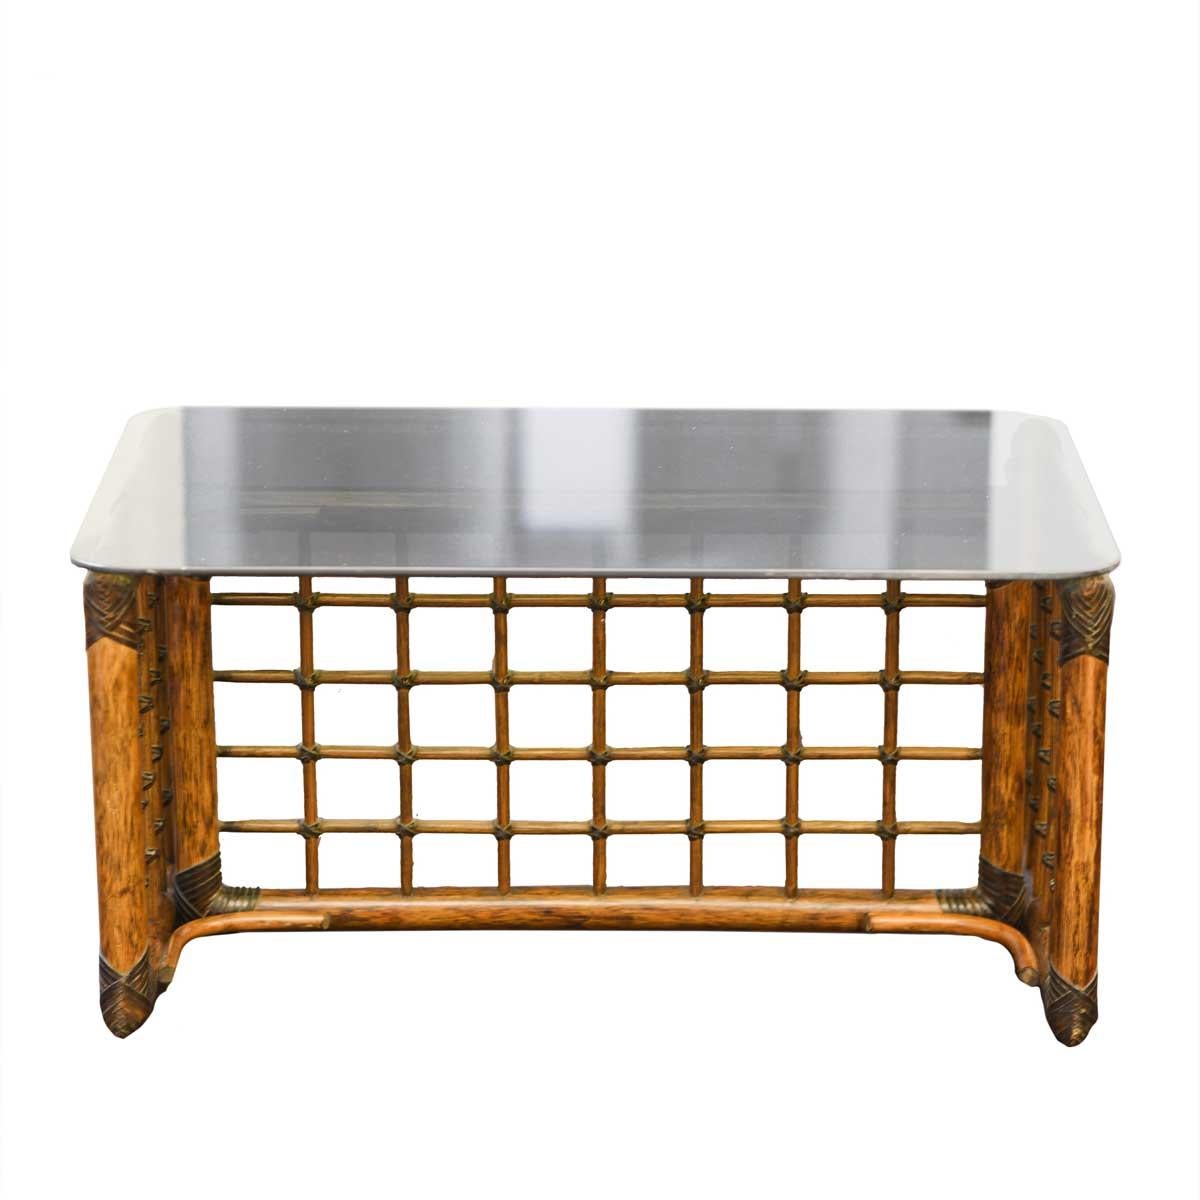 Coffee table with rattan structure and glass top.
This small table, which can be used in a thousand different ways, was designed in 1970 by a couple of architects: Tobia Scarpa and Afra Bianchin. The two met at the IUAV and never left each other.